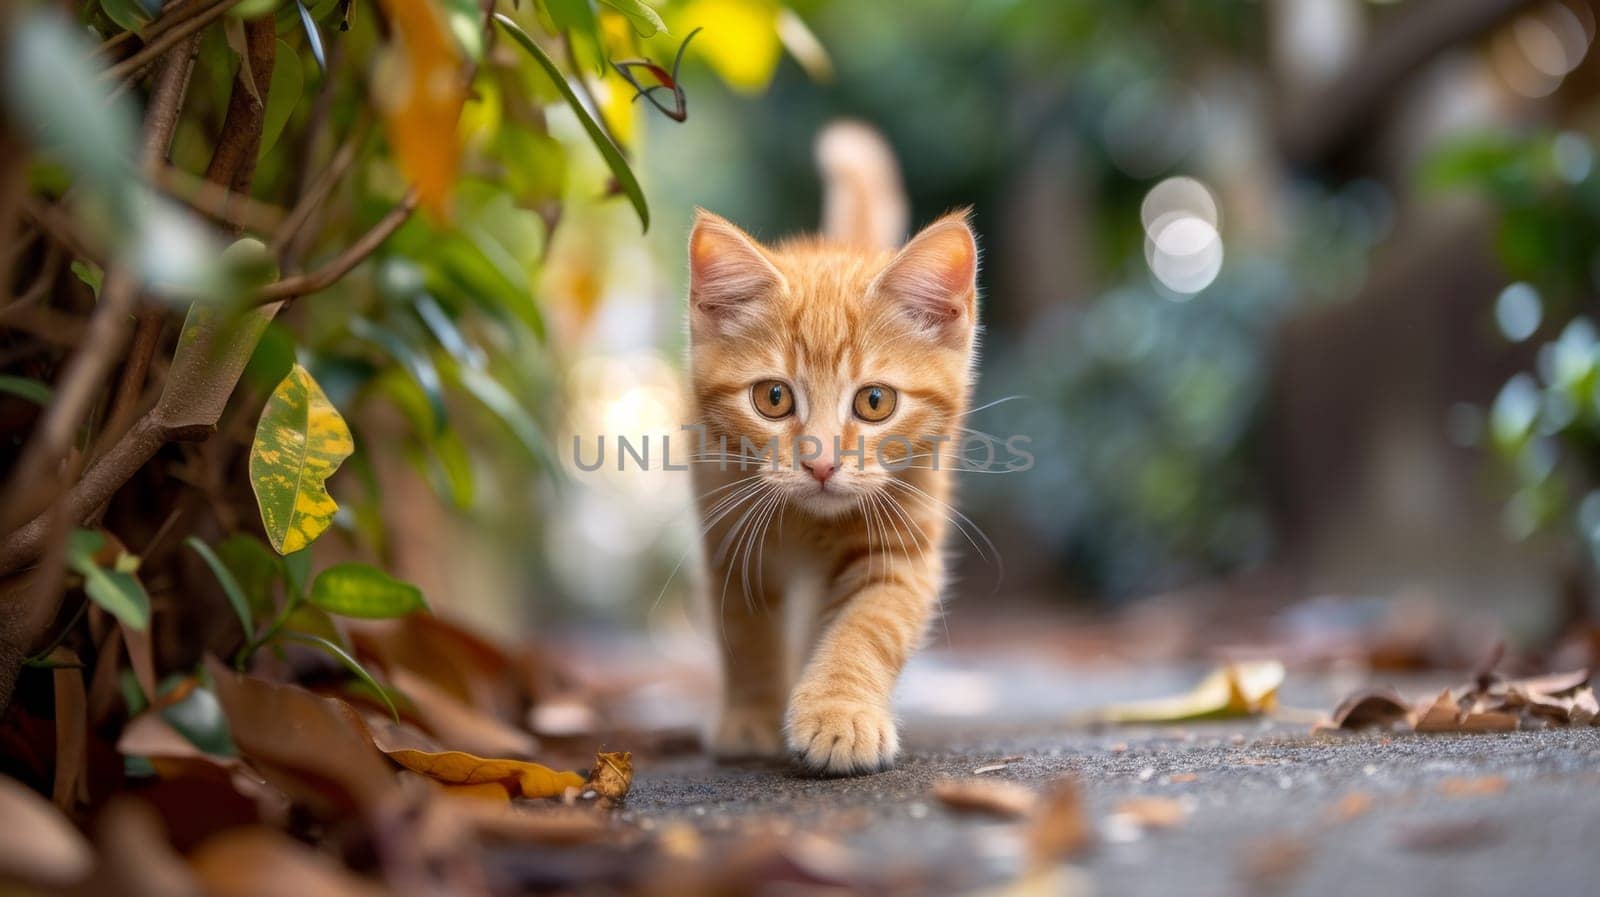 A small orange cat walking on a path in front of leaves, AI by starush